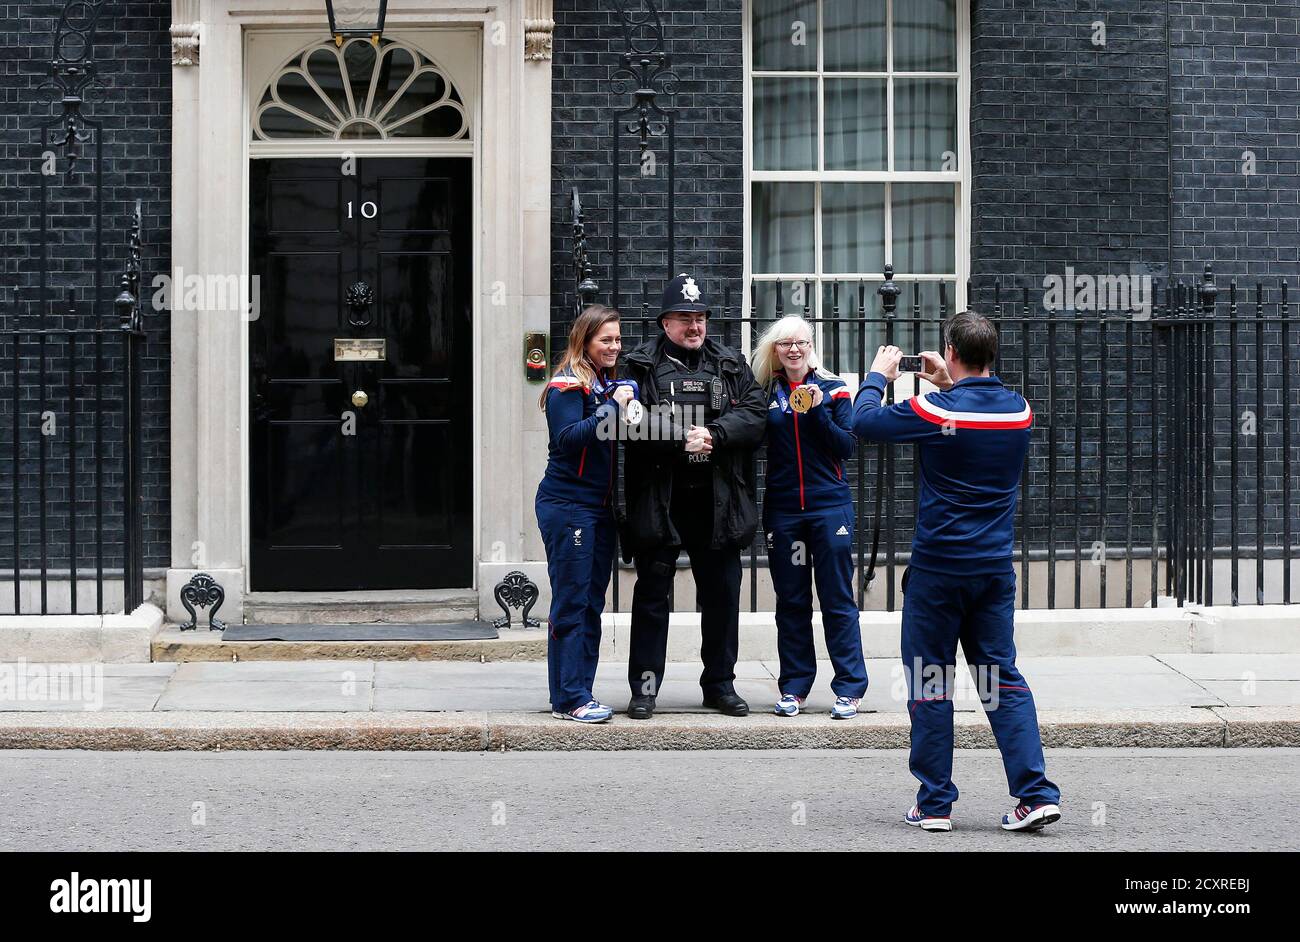 Britain's Paralympians Caroline Powell (L) and Kelly Gallagher pose with a police officer outside 10 Downing Street during a visit with the British 2014 Paralympic Winter Games team in London March 18, 2014. REUTERS/Suzanne Plunkett (BRITAIN - Tags: POLITICS SPORT OLYMPICS) Stock Photo